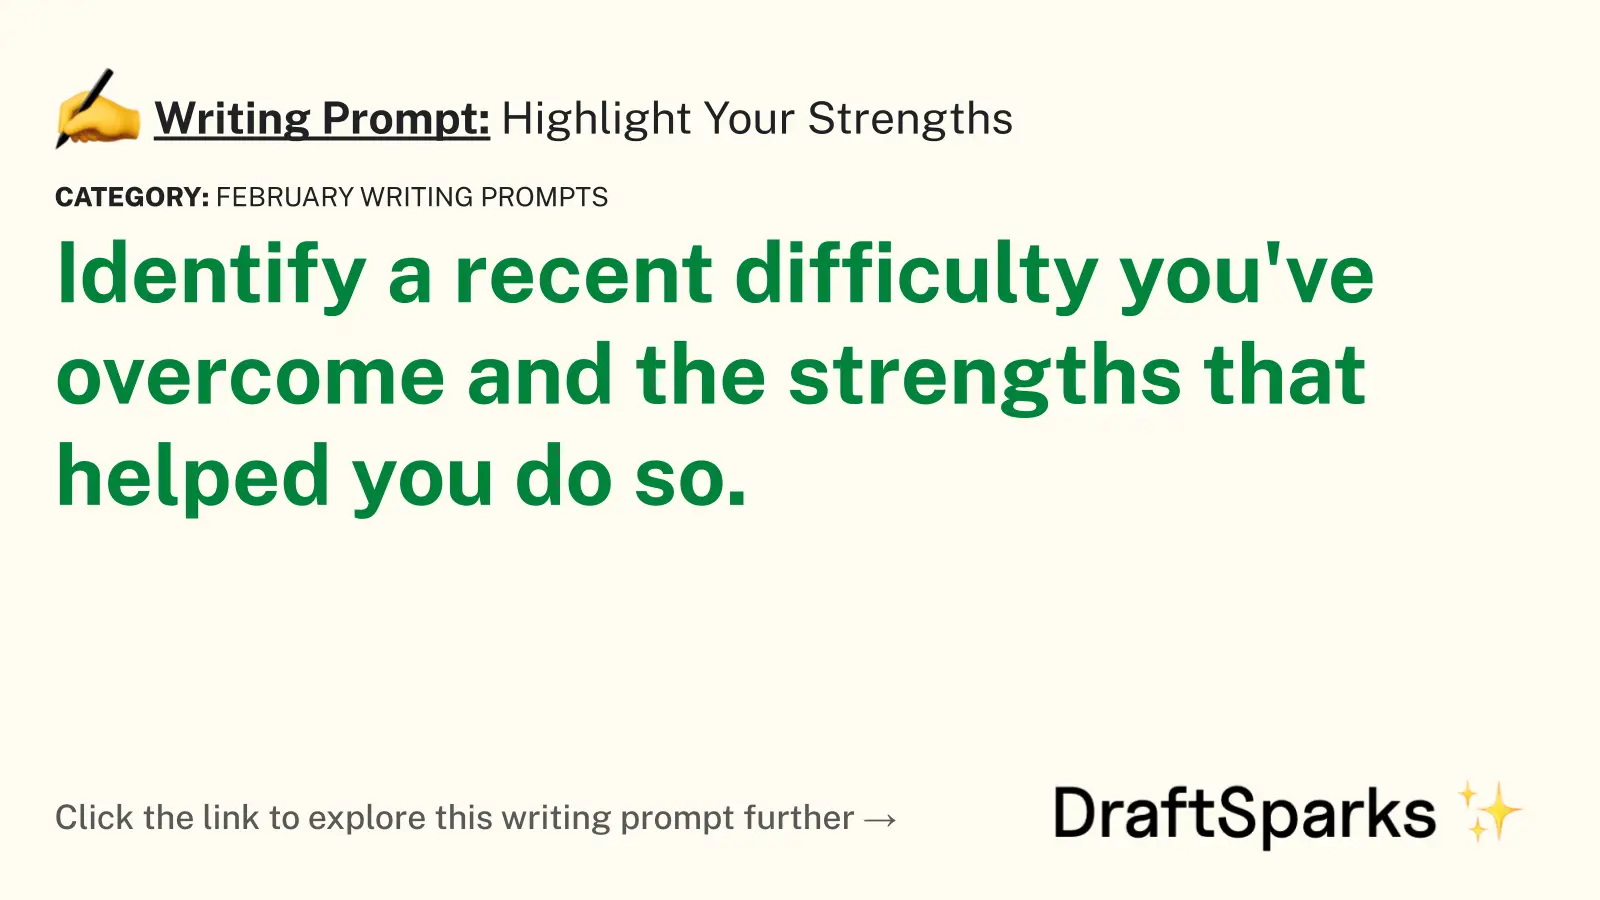 Highlight Your Strengths